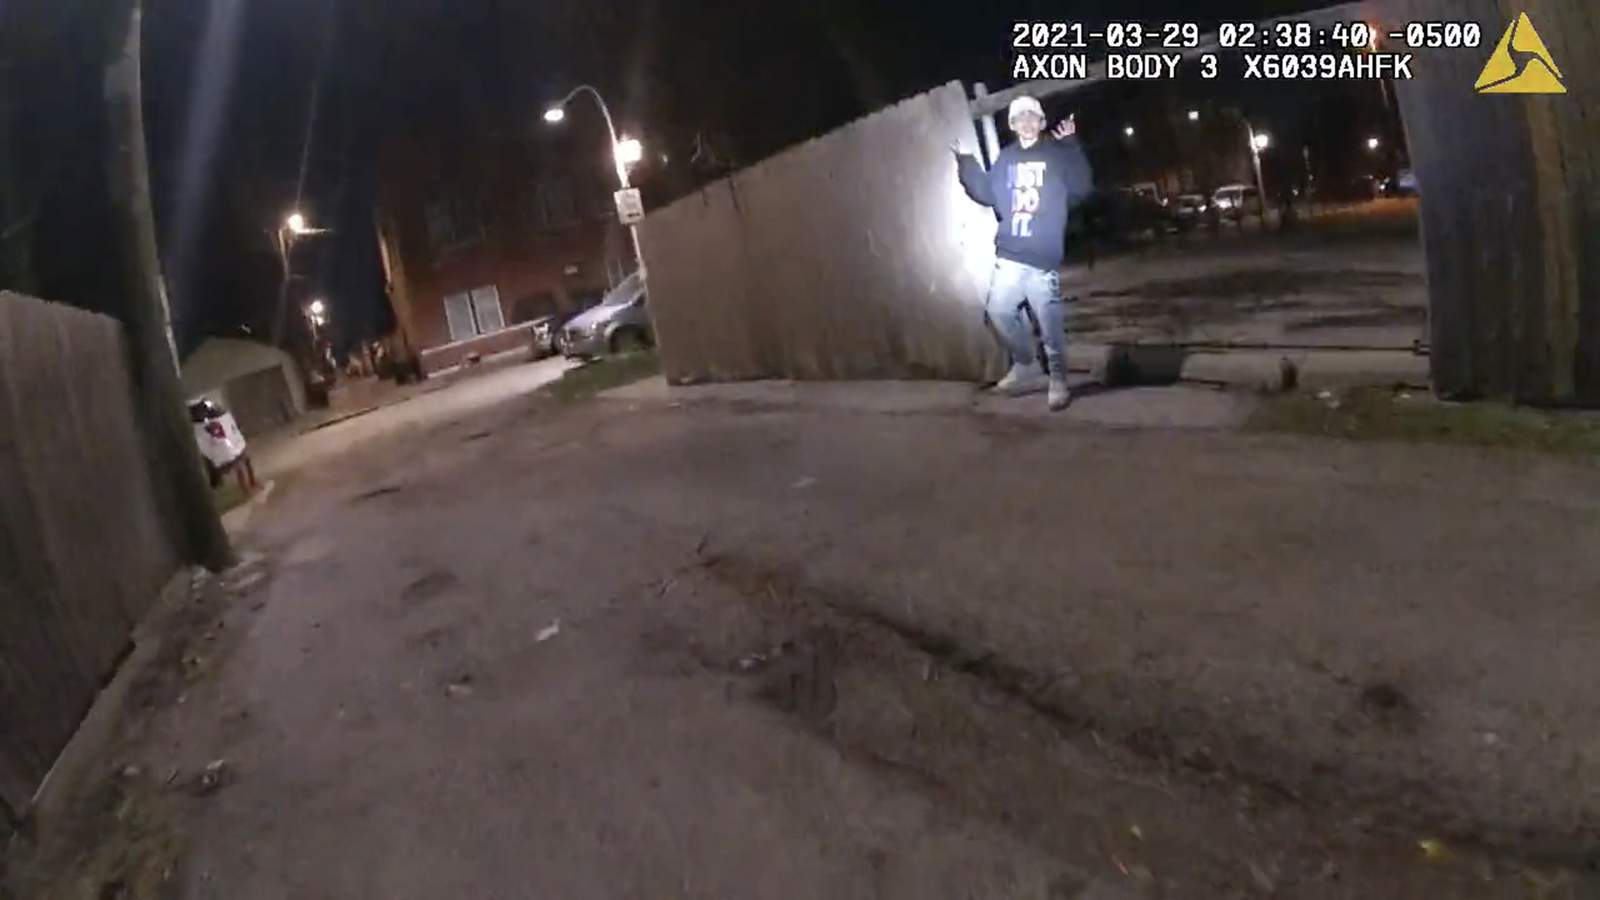 Body camera video released of Chicago police fatally shooting 13-year-old boy